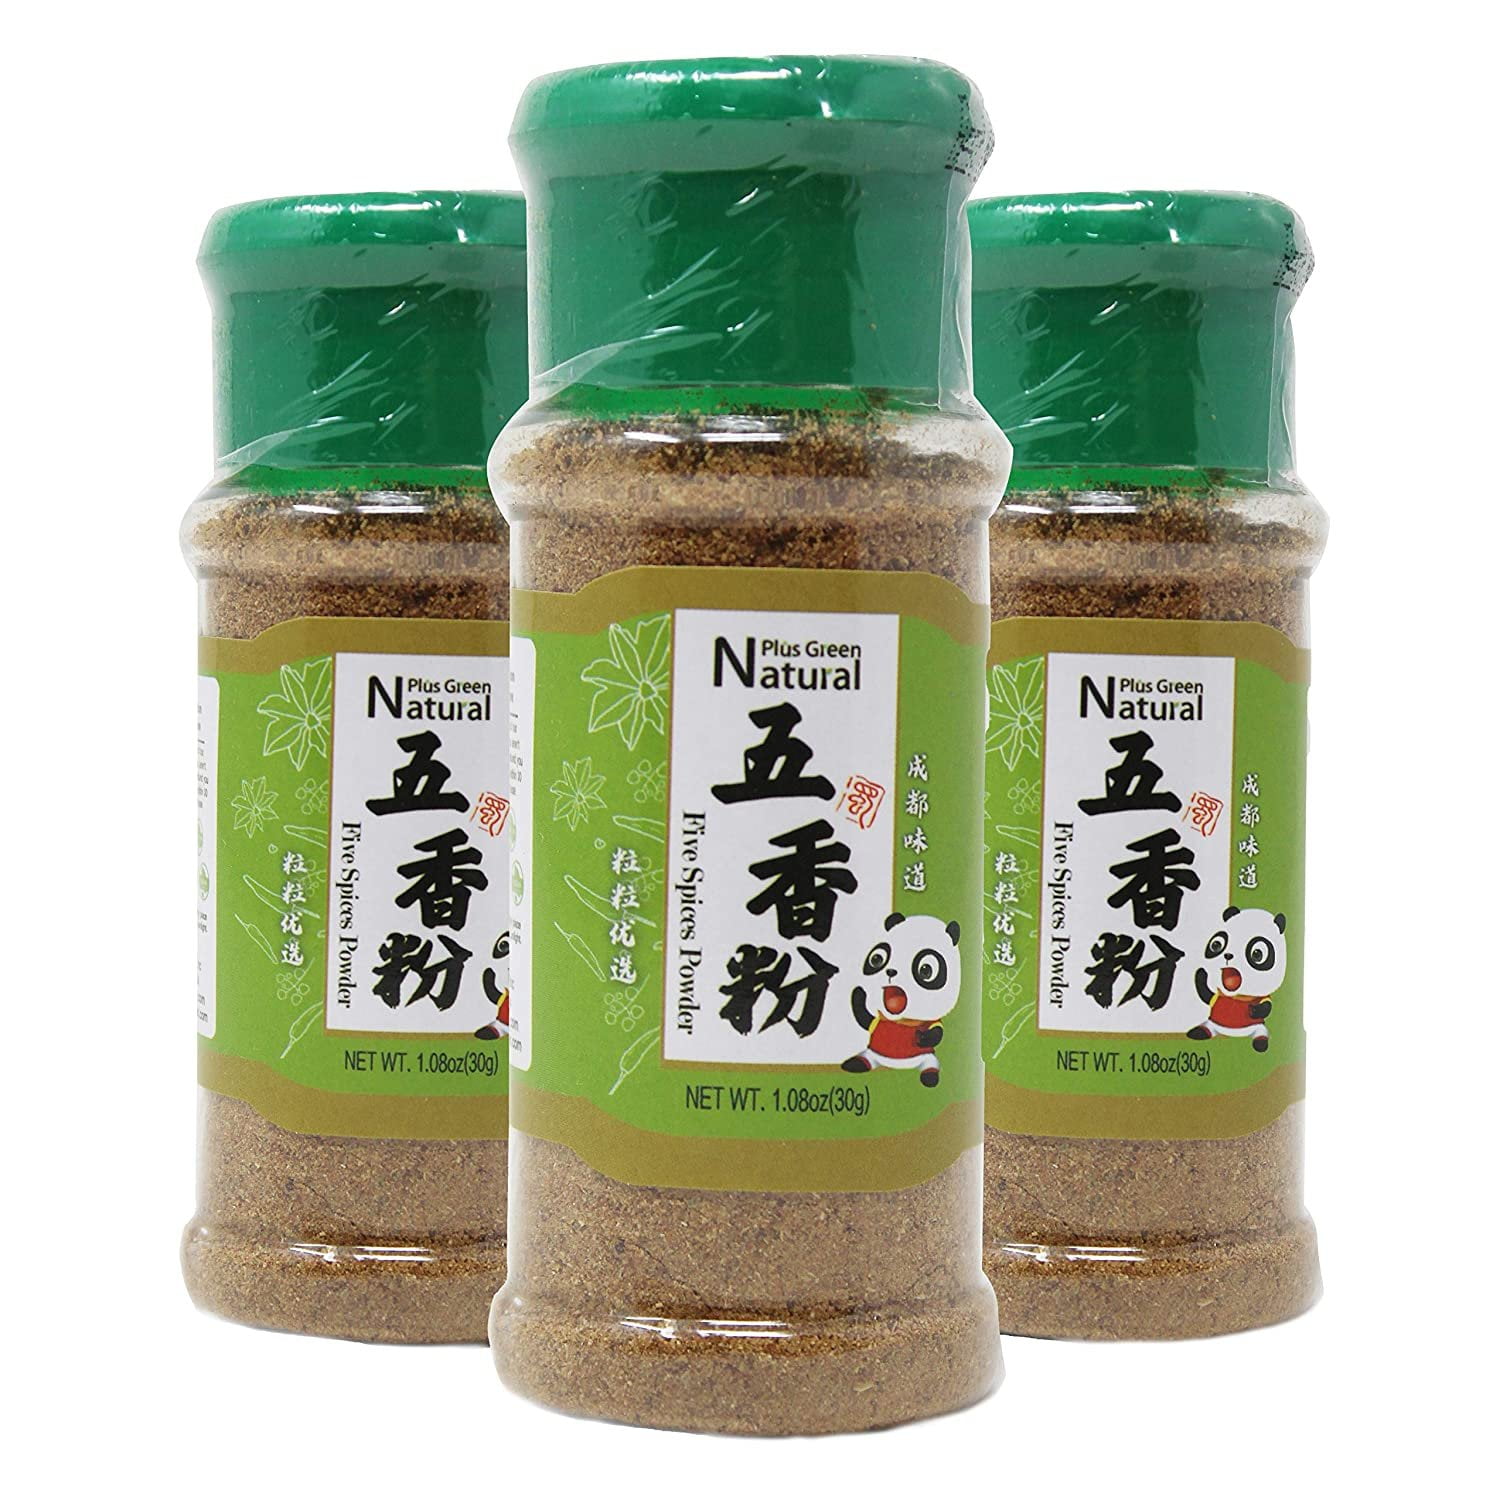 Chinese 5-Spice Blend by NY Spice Shop